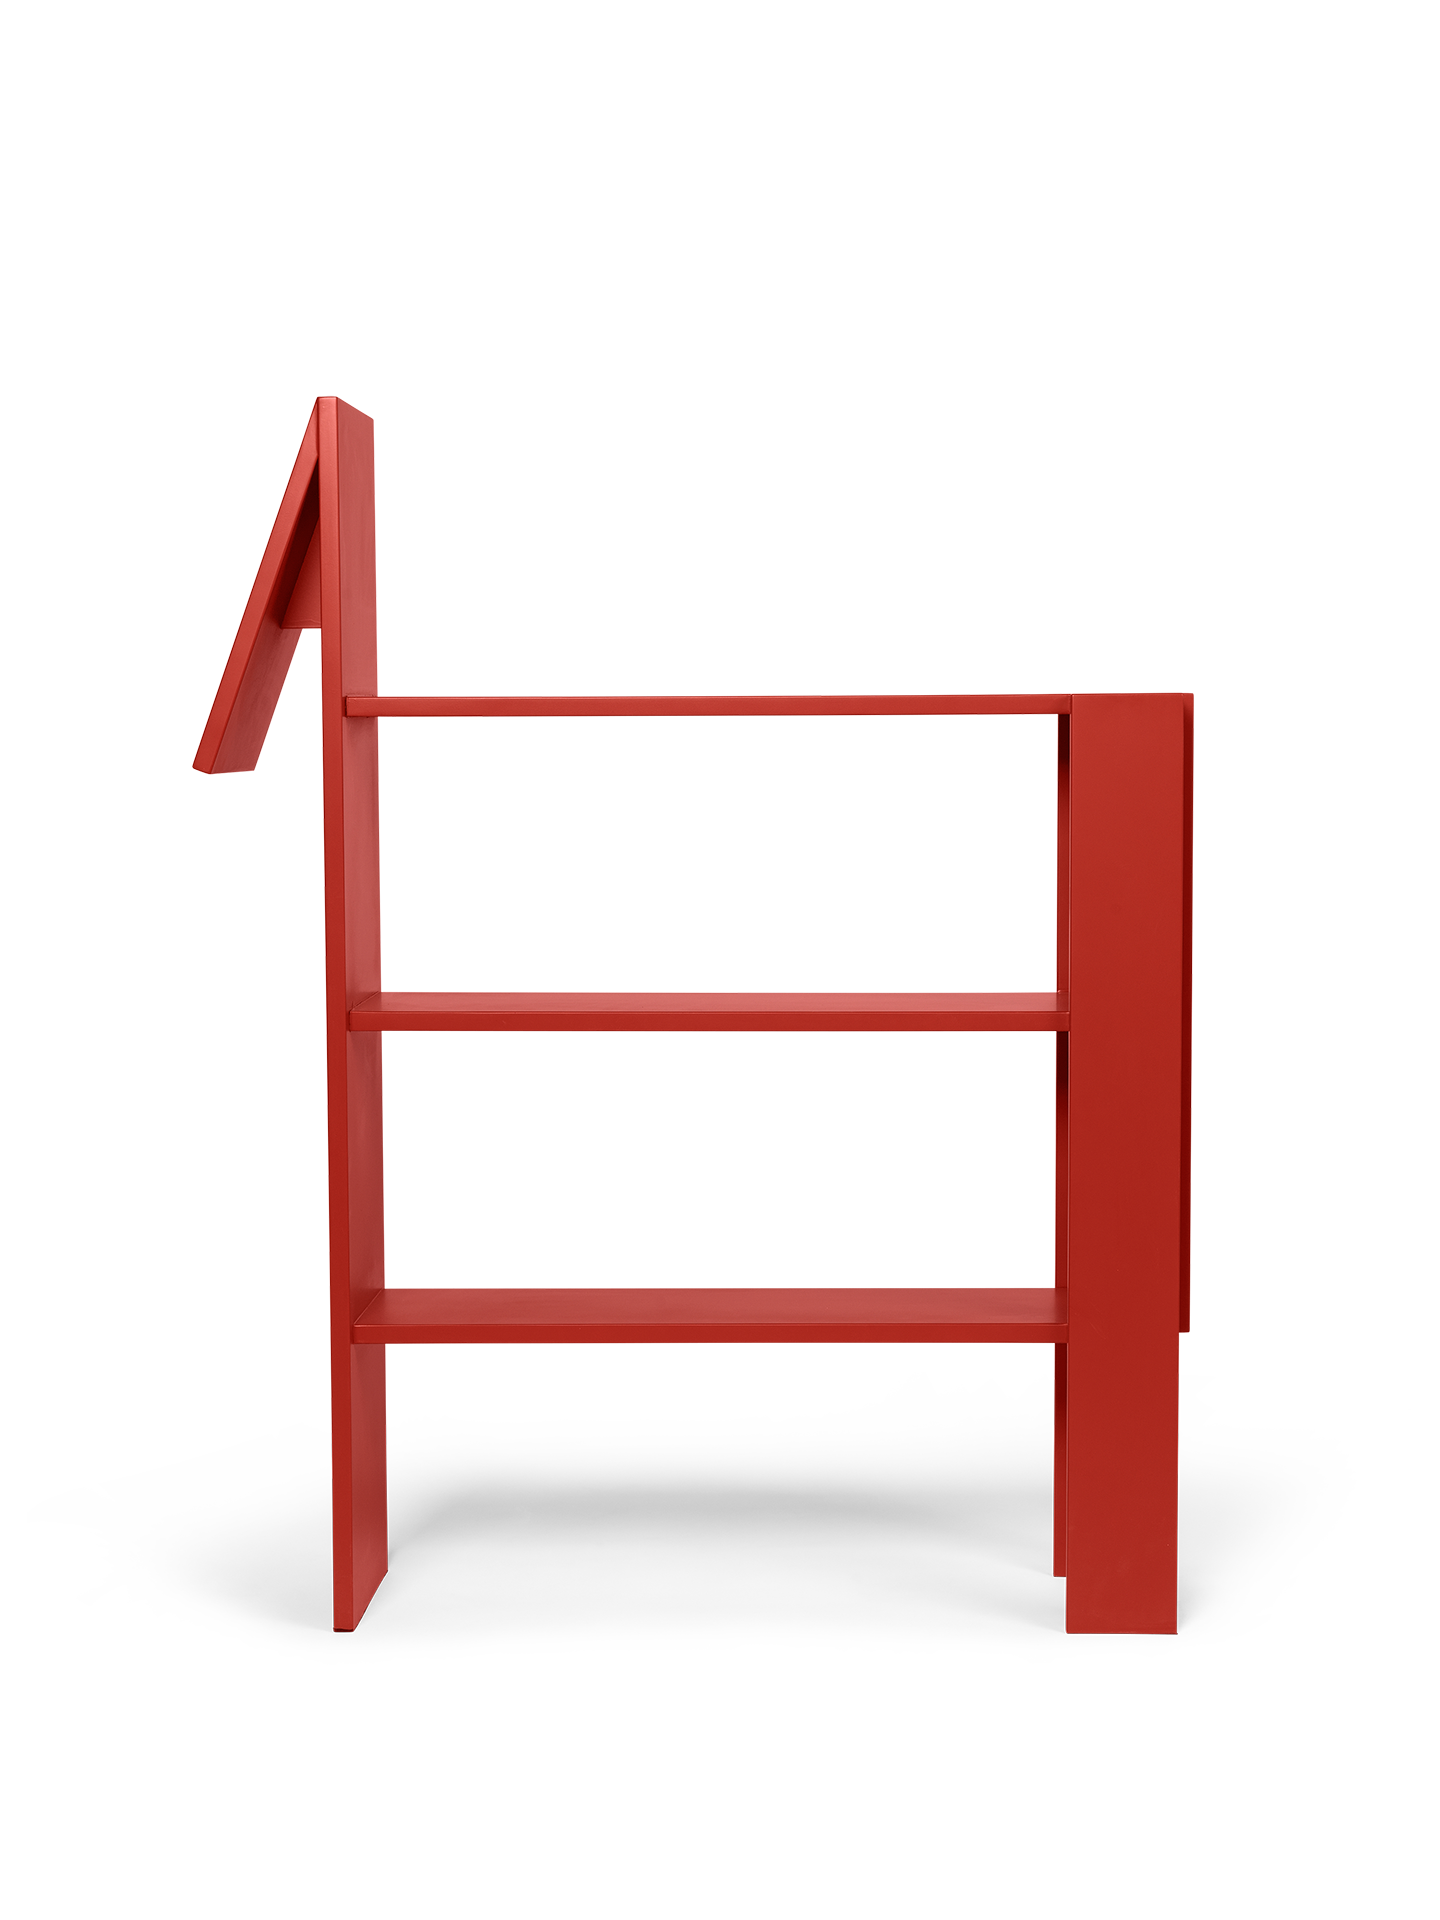 Ferm Living Horse Bookcase Poppy Red